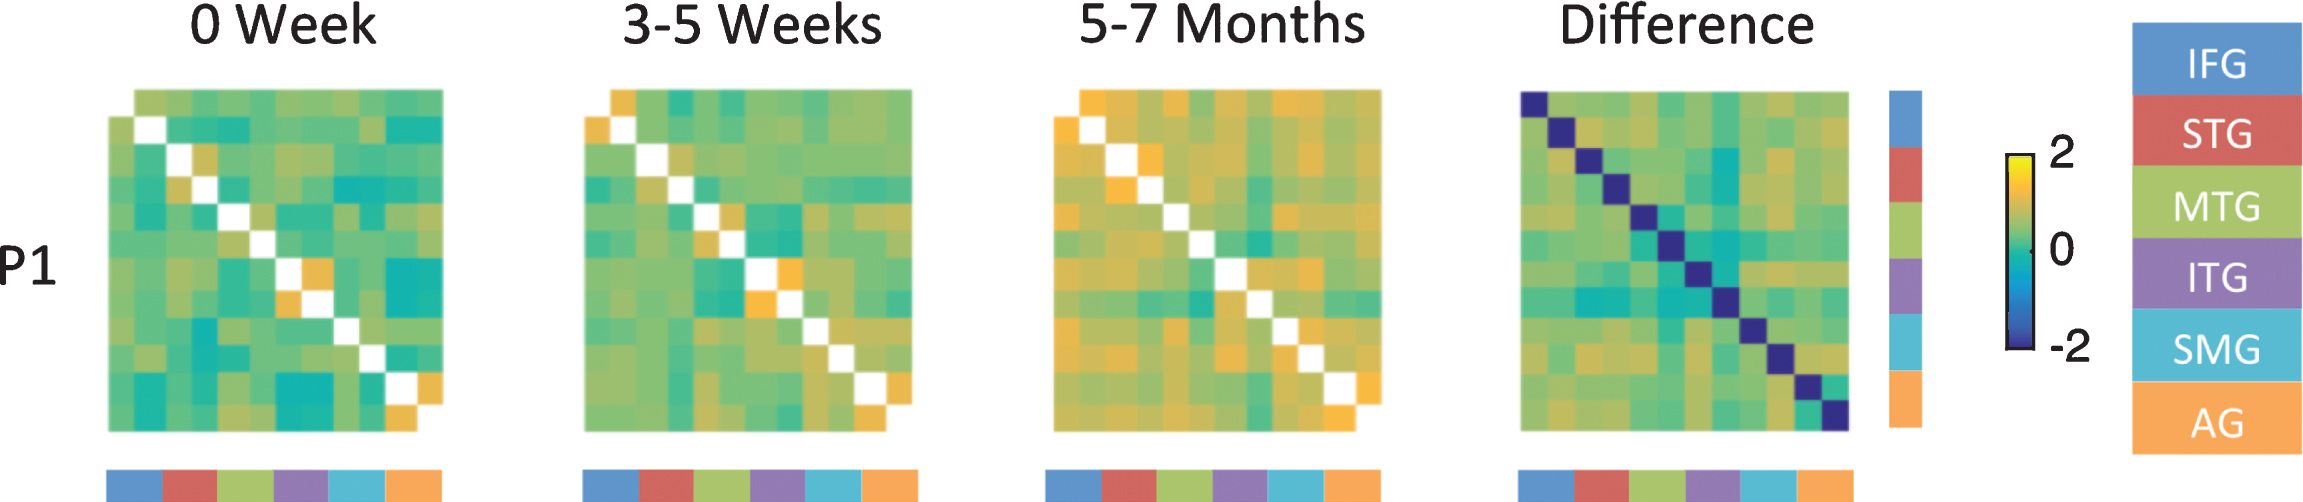 Fisher-transformed correlation matrix for the resting state data for P1 (who showed the most improvement) at each time point. Difference map shows the difference in correlation between the 5–7 month scan and the 0 week scan for the resting state data. Correlations were assessed across 12 ROIs in the language network corresponding to the left and right inferior frontal gyrus (IFG), superior temporal gyrus (STG), middle temporal gyrus (MTG), inferior temporal gyrus (ITG), supramarginal gyrus (SMG), and angular gyrus (AG).